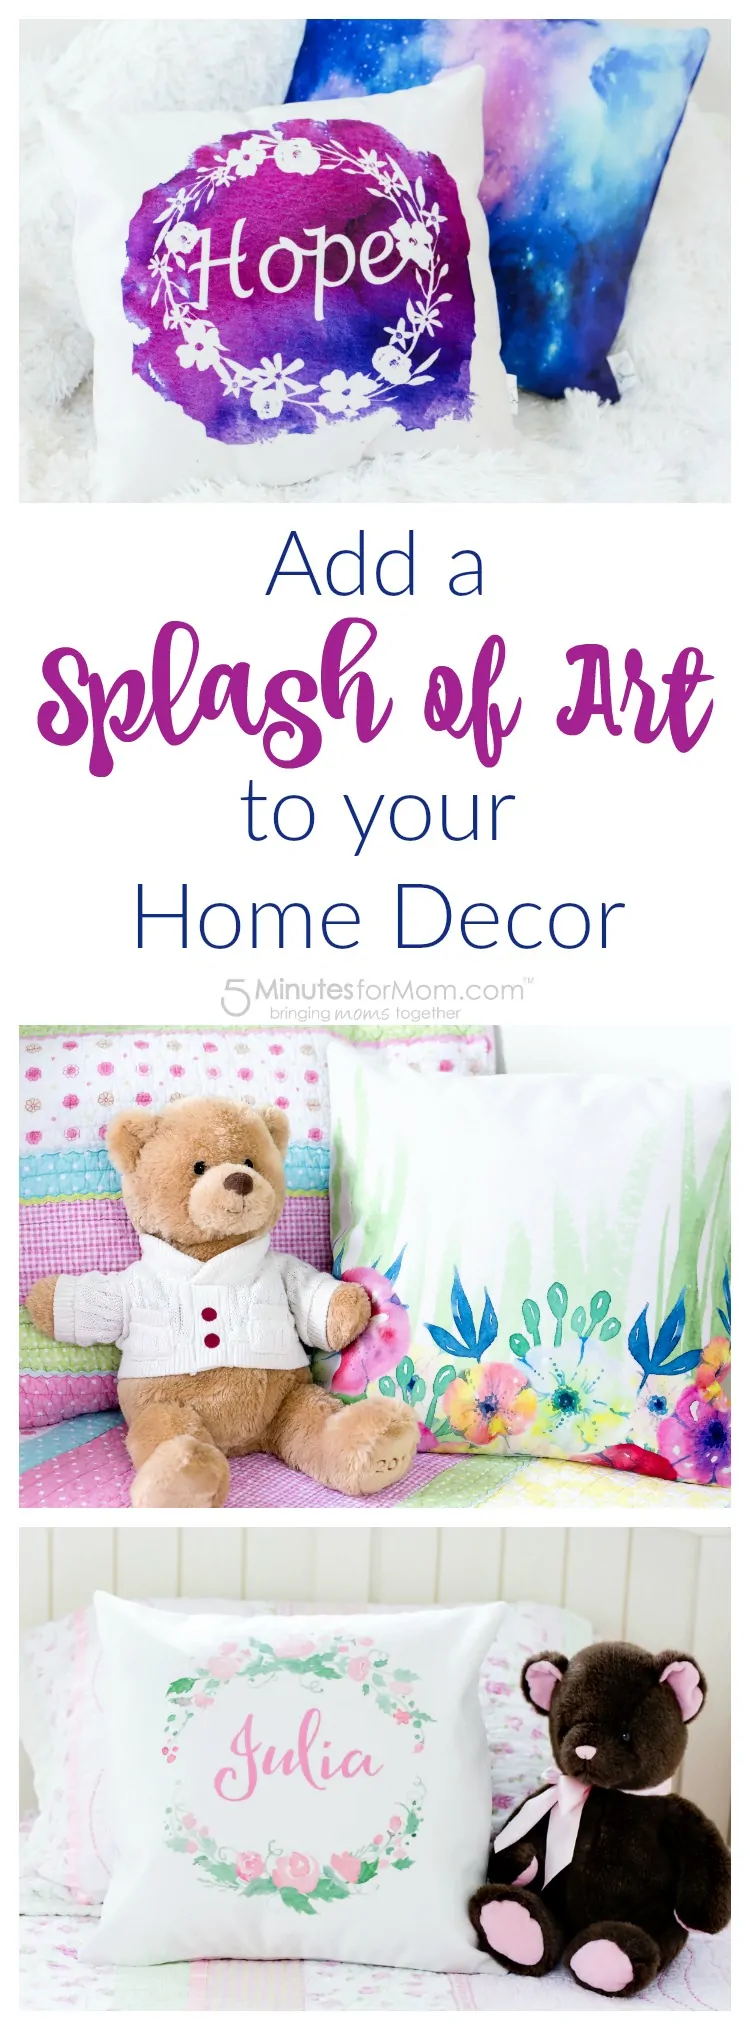 Add a splash of art to your home decor